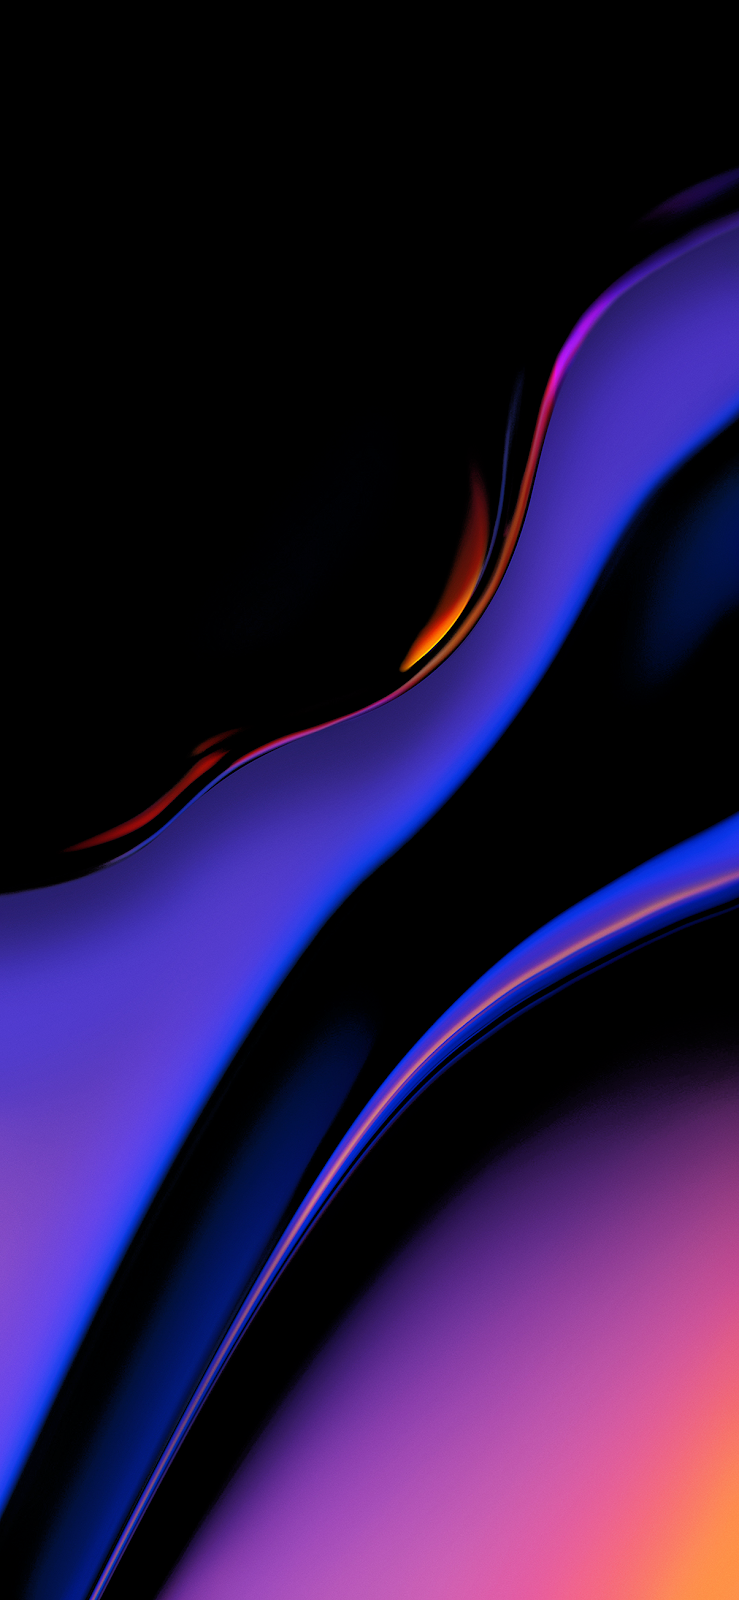 OnePlus 6T Wallpaper Amoled-ified